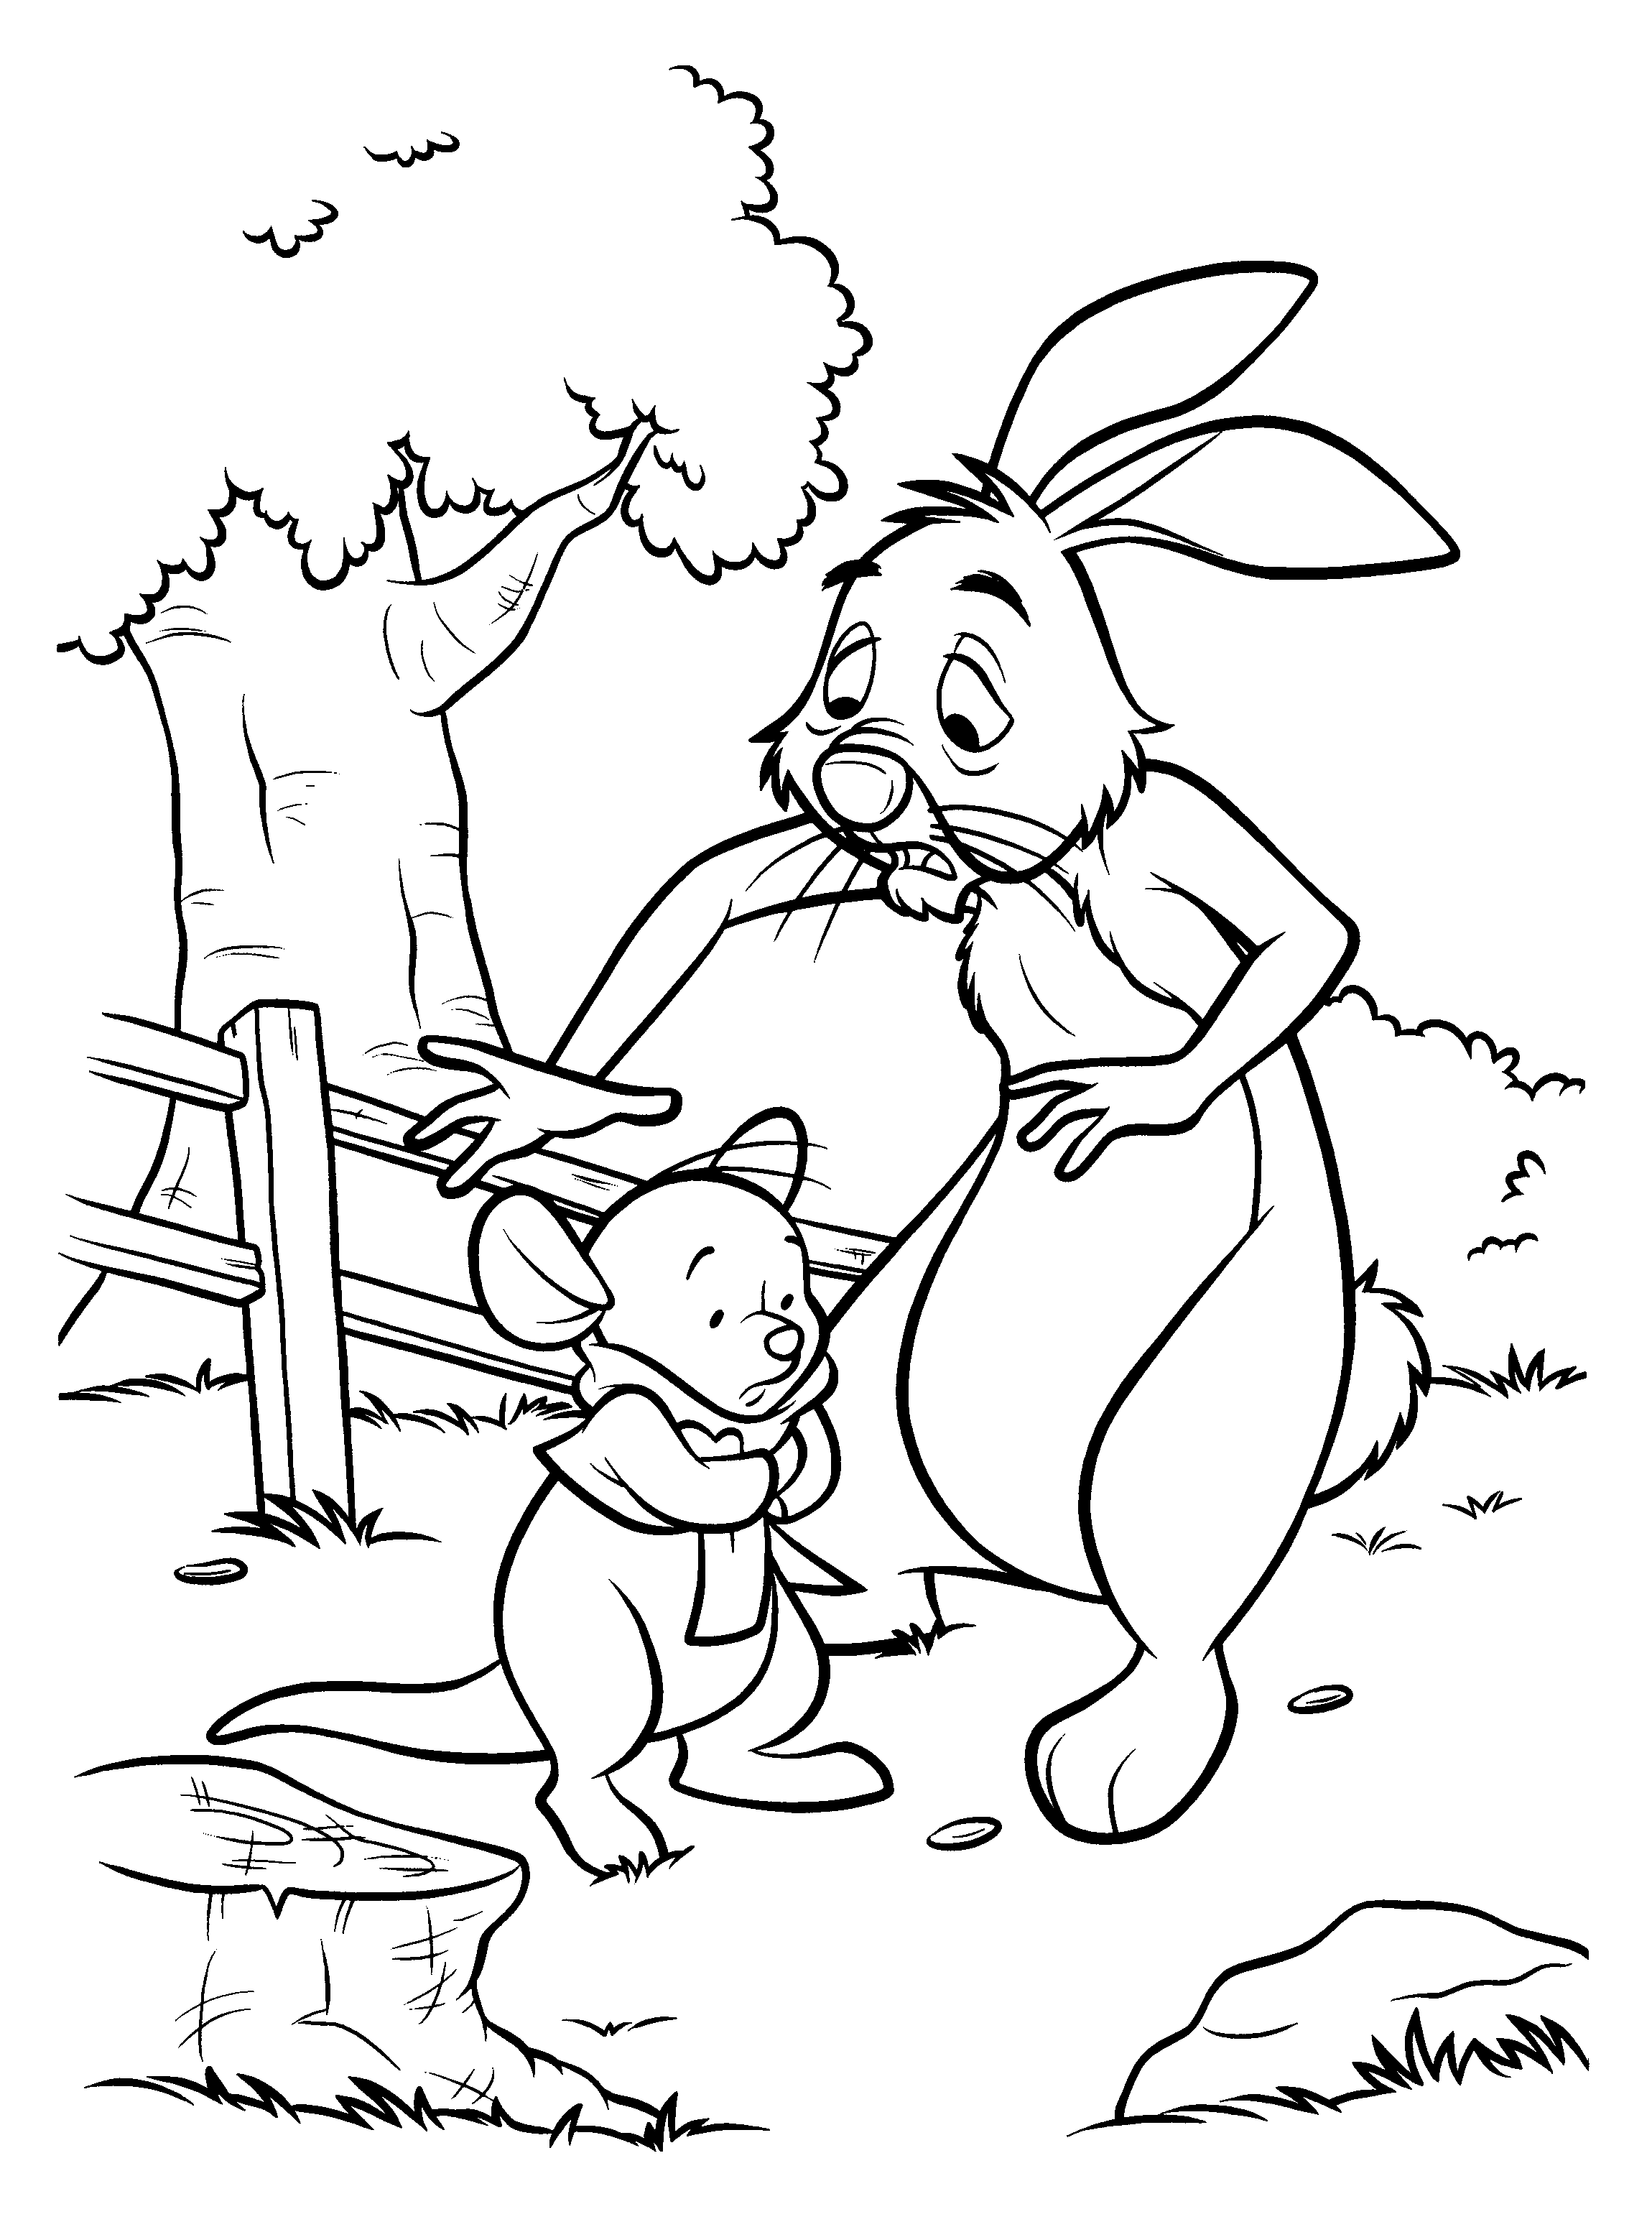 Roo And Rabbit Coloring Page